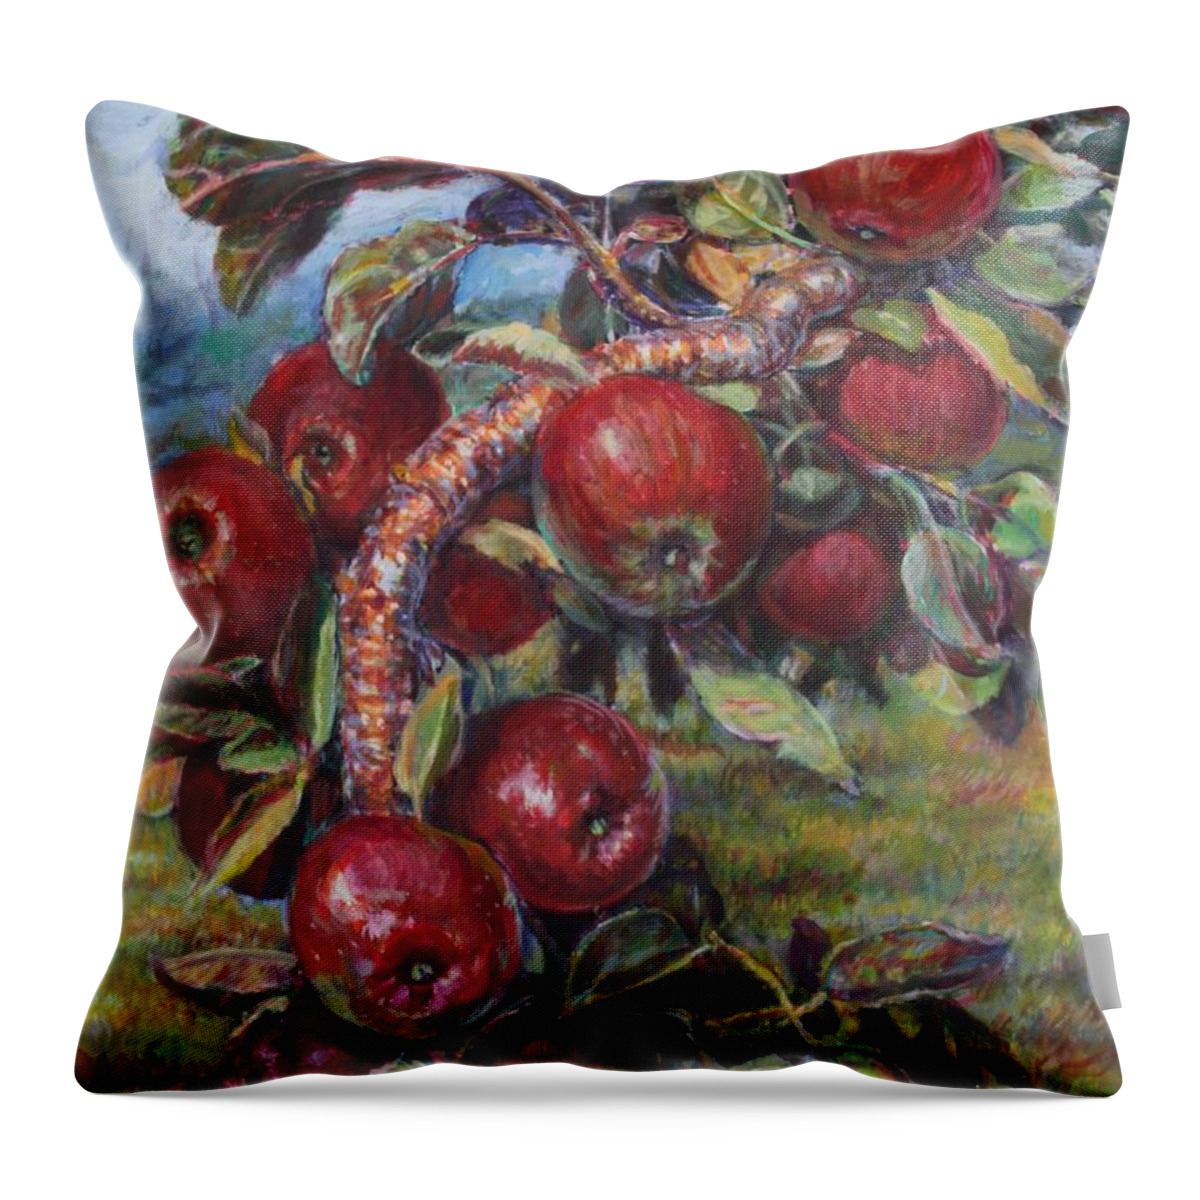 Red Apple Tree Throw Pillow featuring the painting Apple Tree by Veronica Cassell vaz